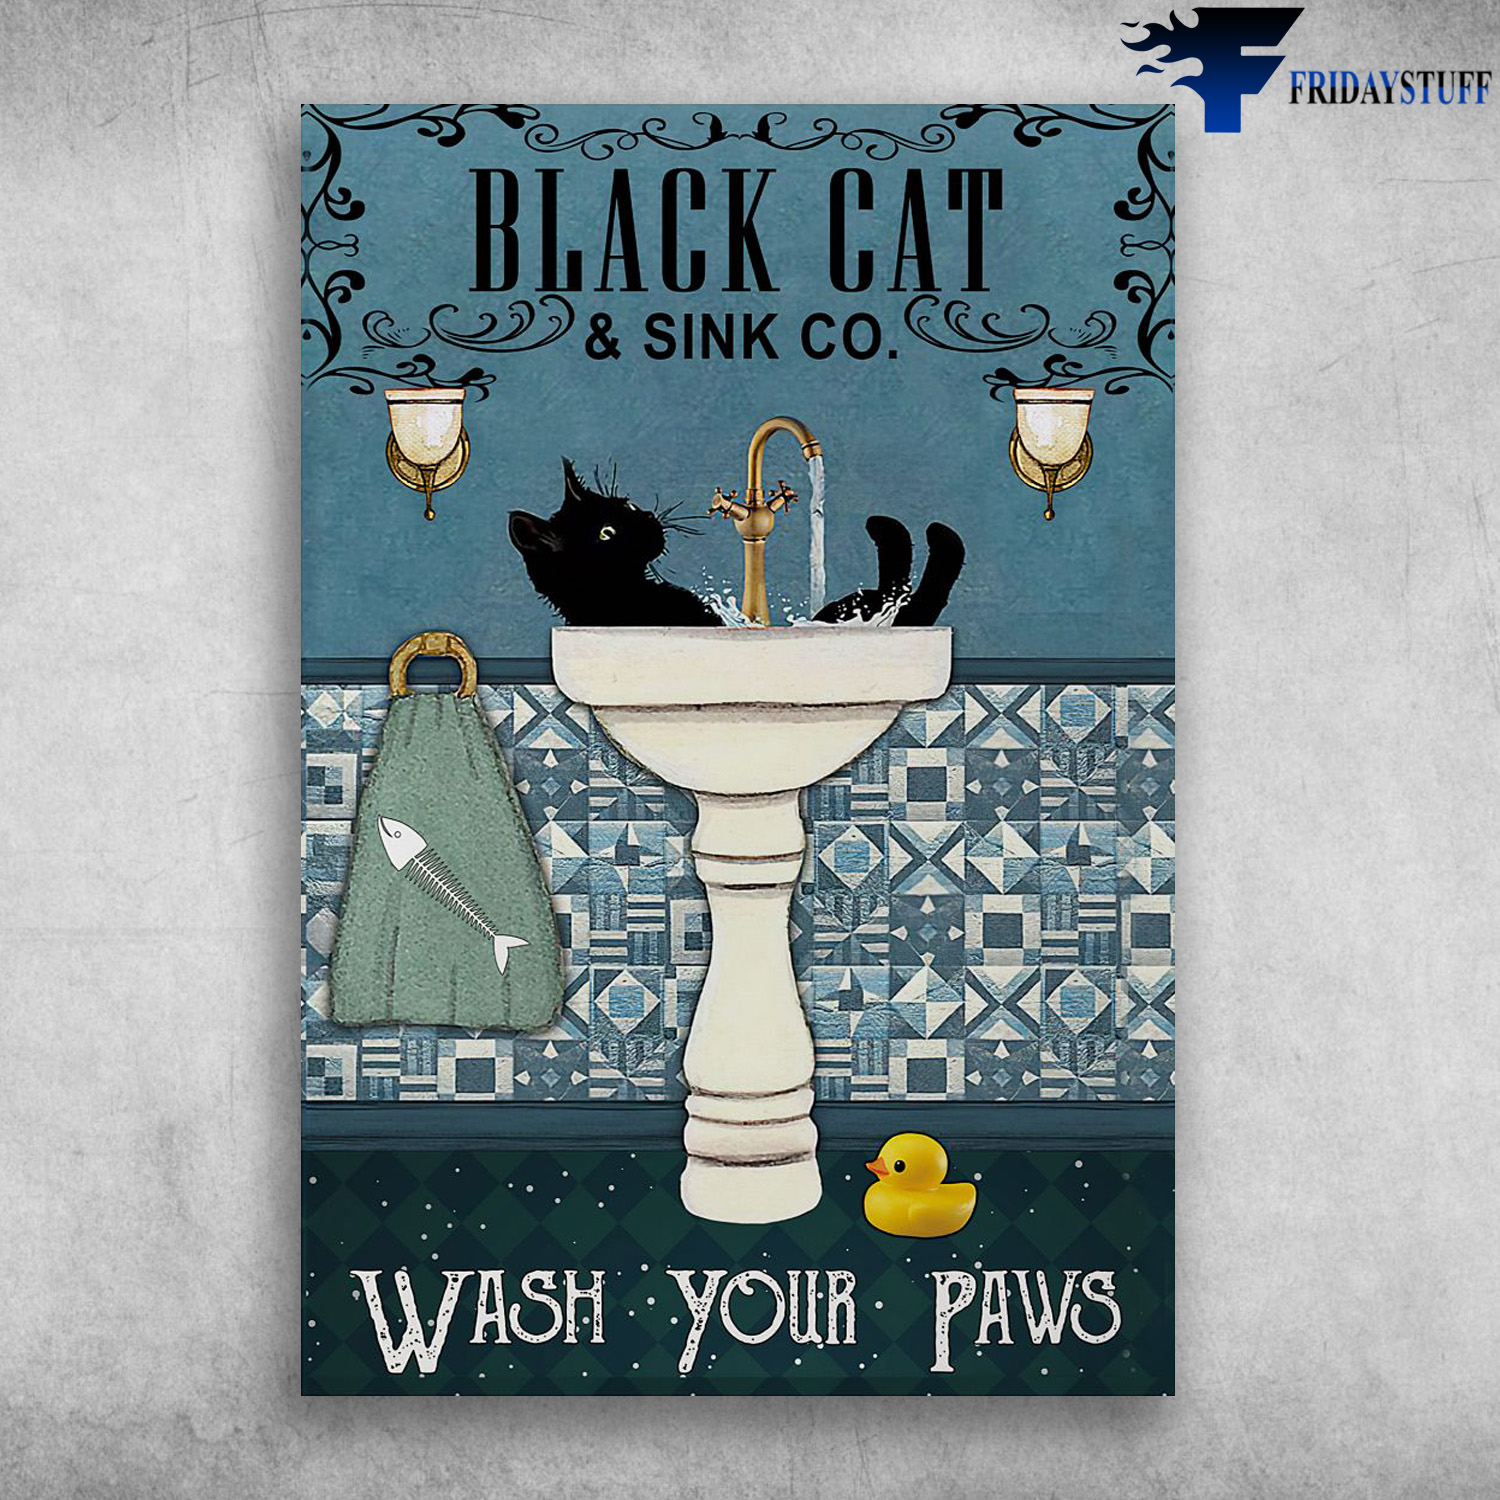 Black Cat In The Sink - Black Cat And Sink CO., Wash Your Paws